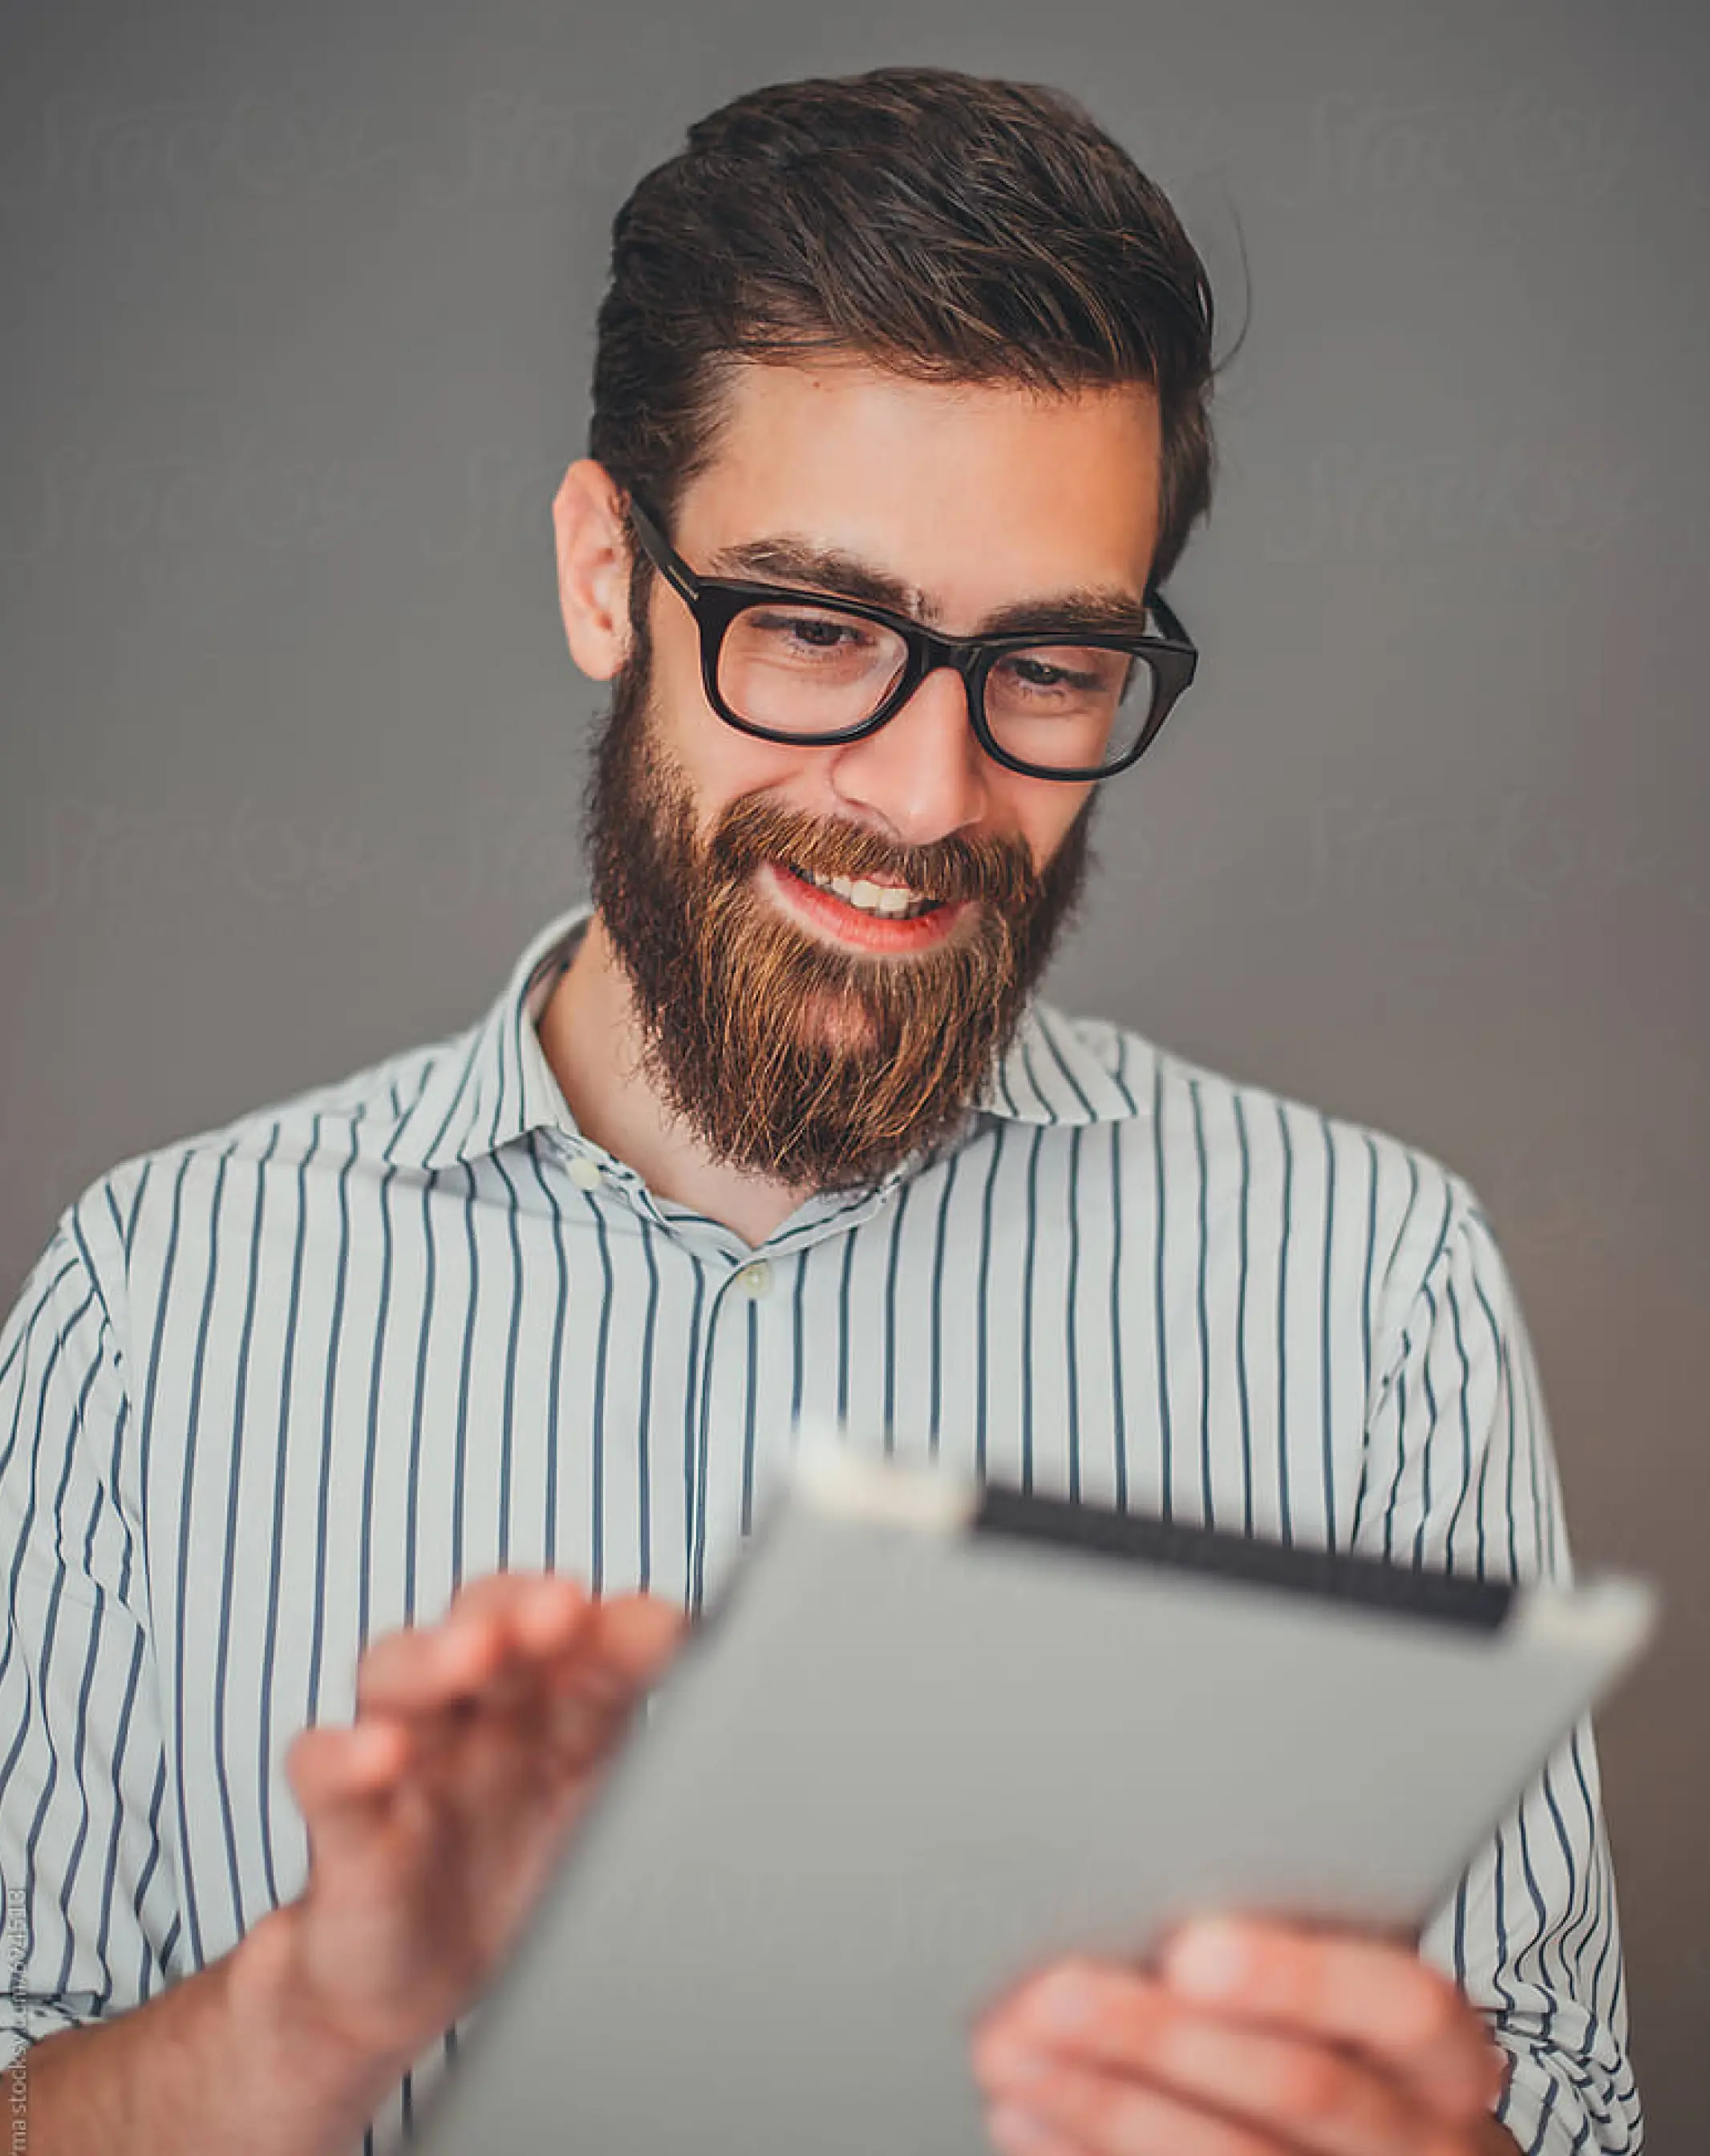 Man smiling, looking at tablet device